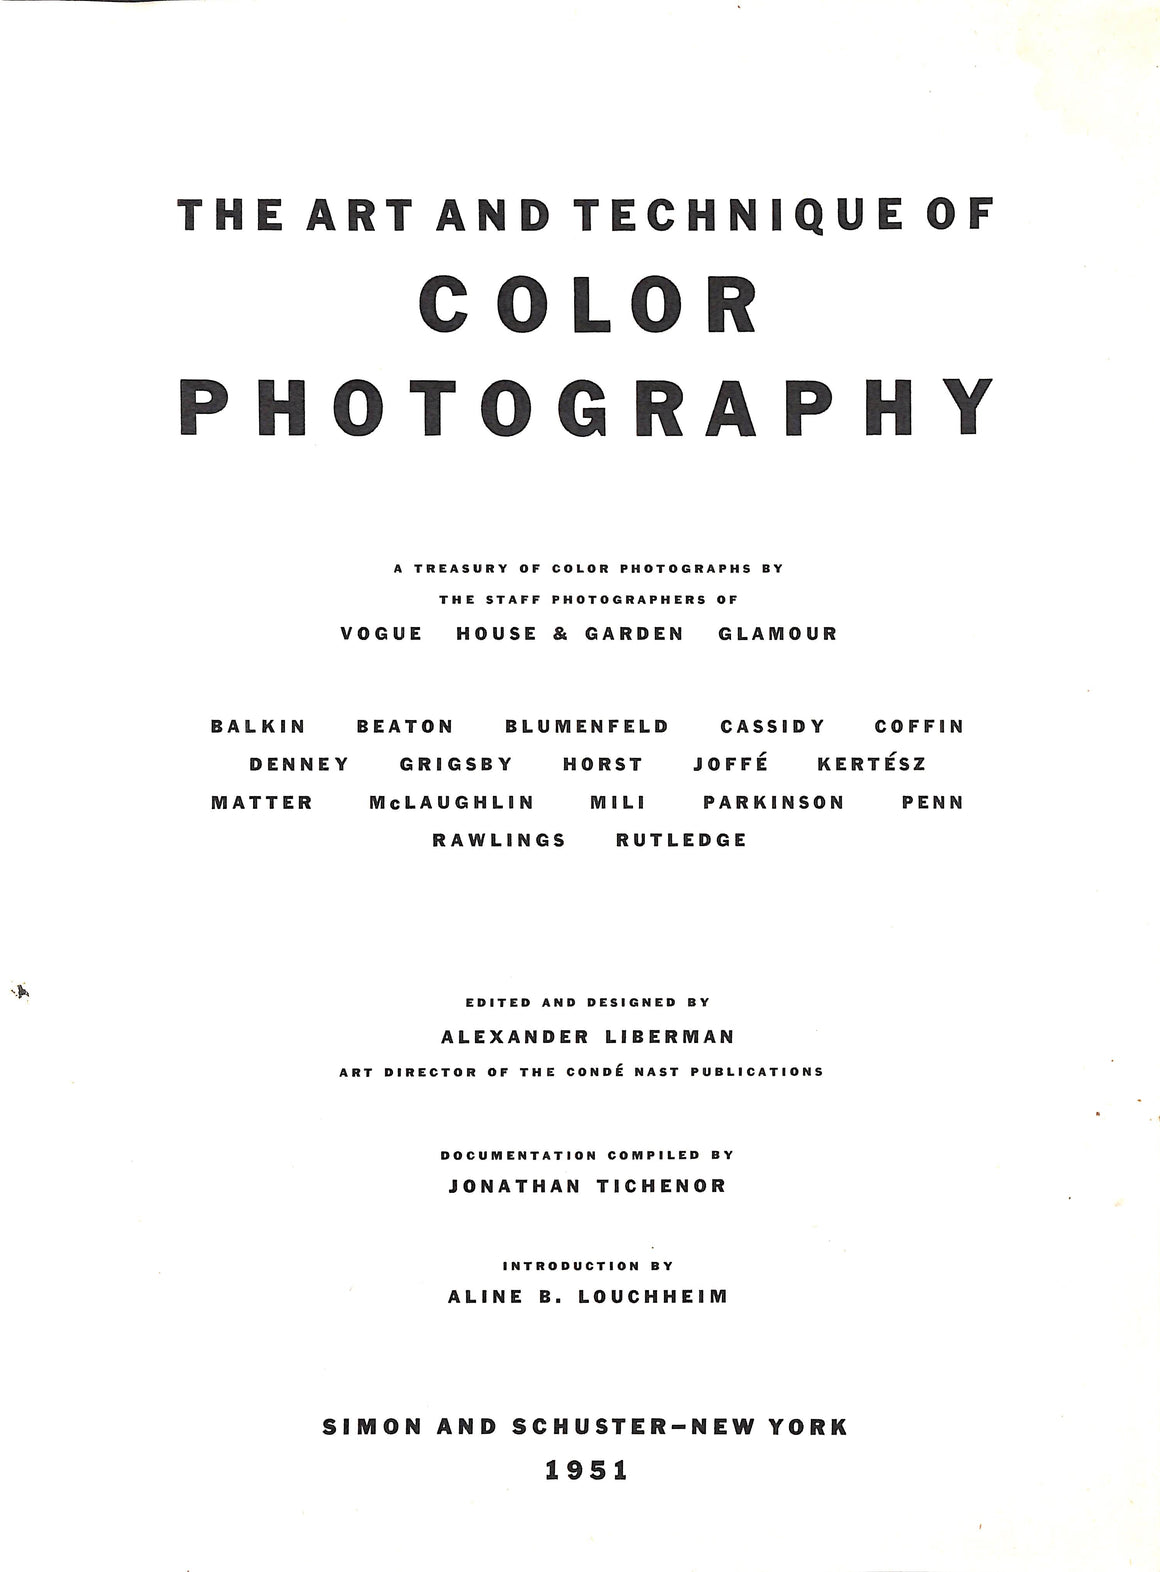 The Art and Technique of Color Photography by Alexander Lieberman